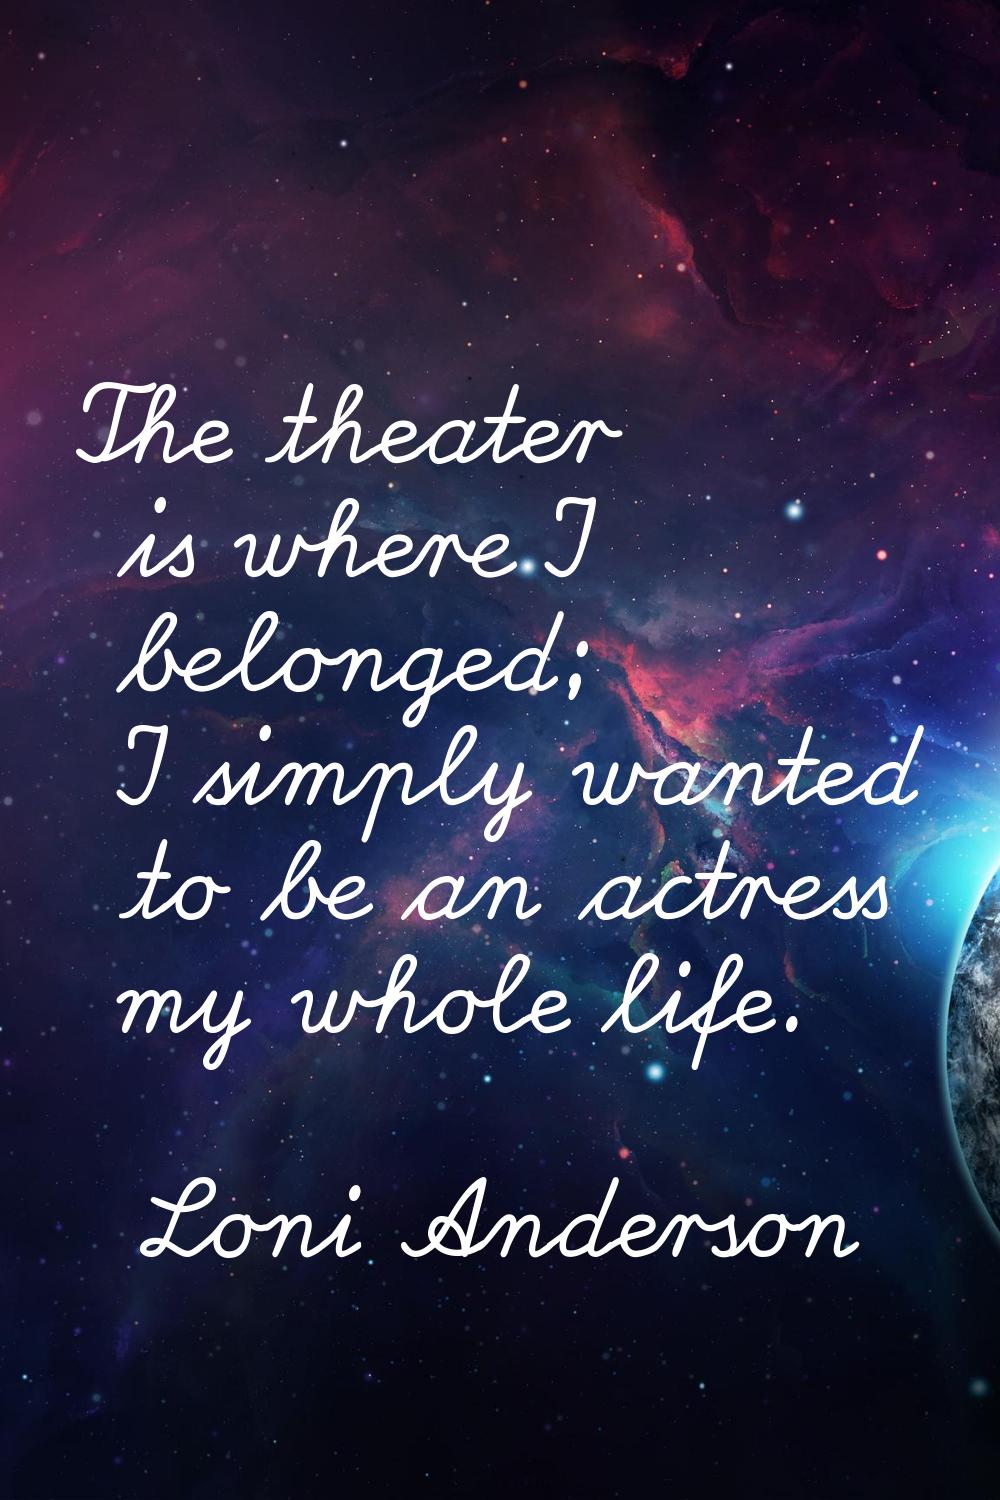 The theater is where I belonged; I simply wanted to be an actress my whole life.